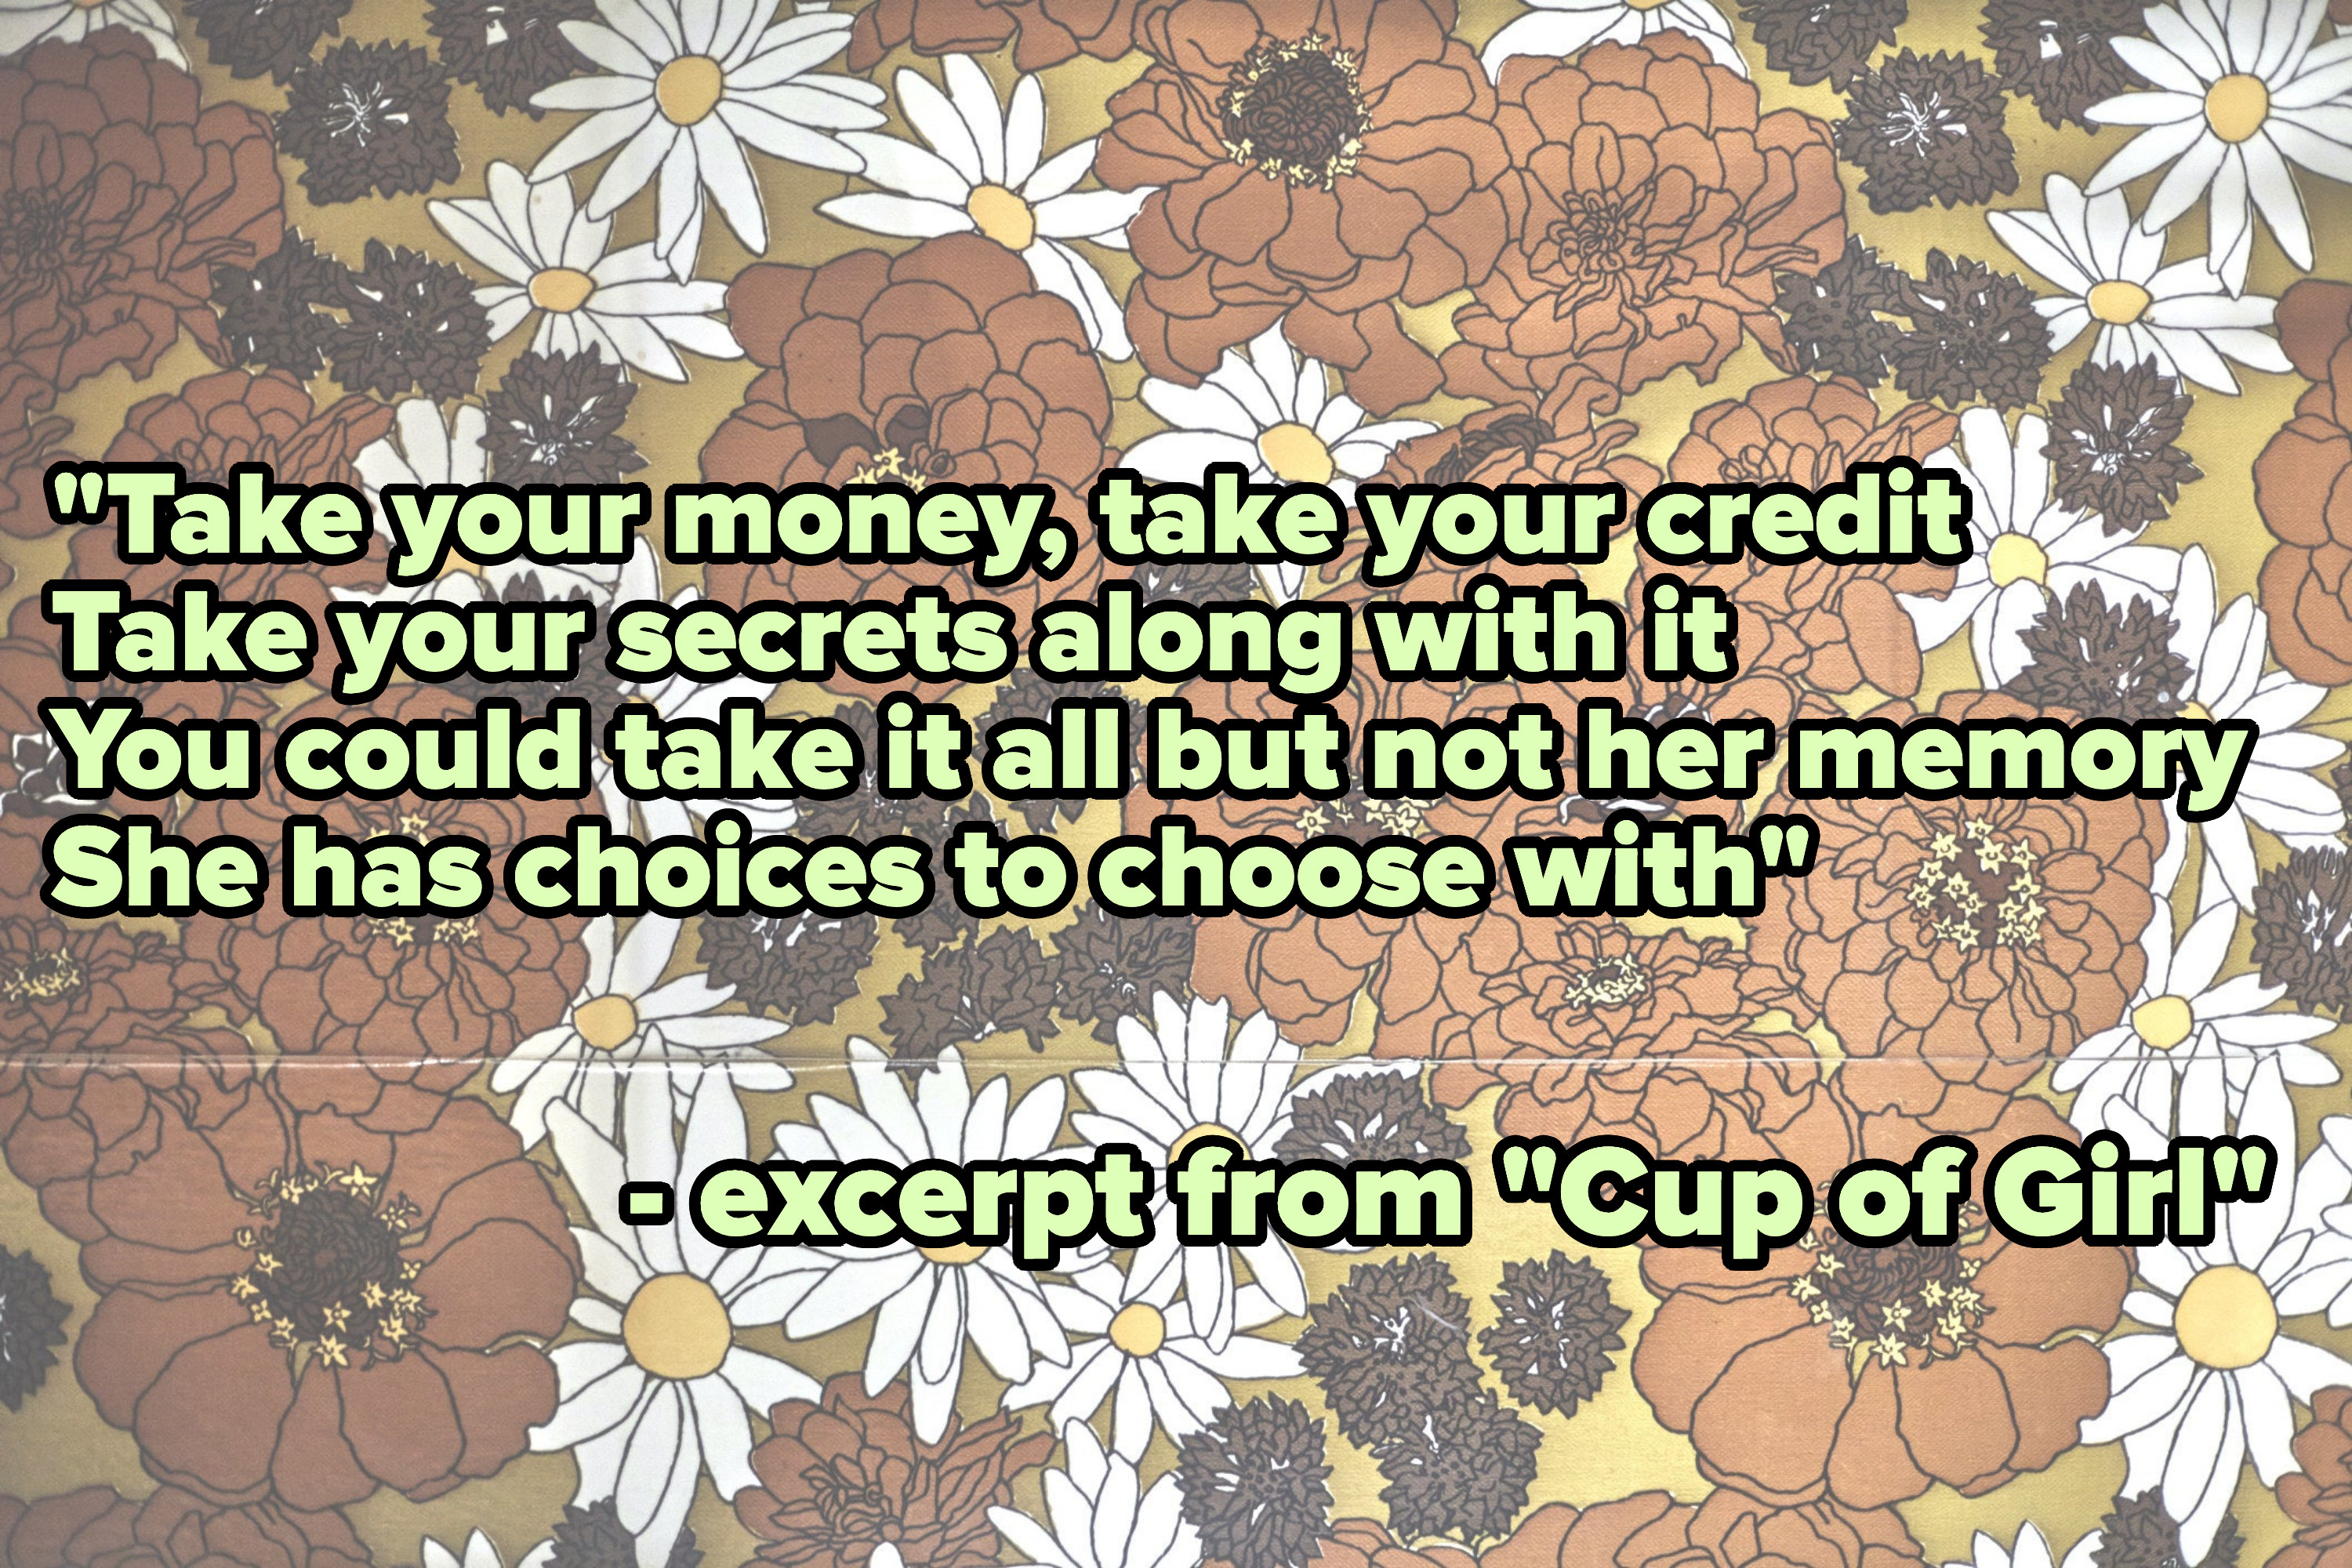 Lyrics from &quot;Cup of Girl&quot; read: &quot;Take your money, take your credit, take your secrets along with it, you could take it all but not her memory&quot;